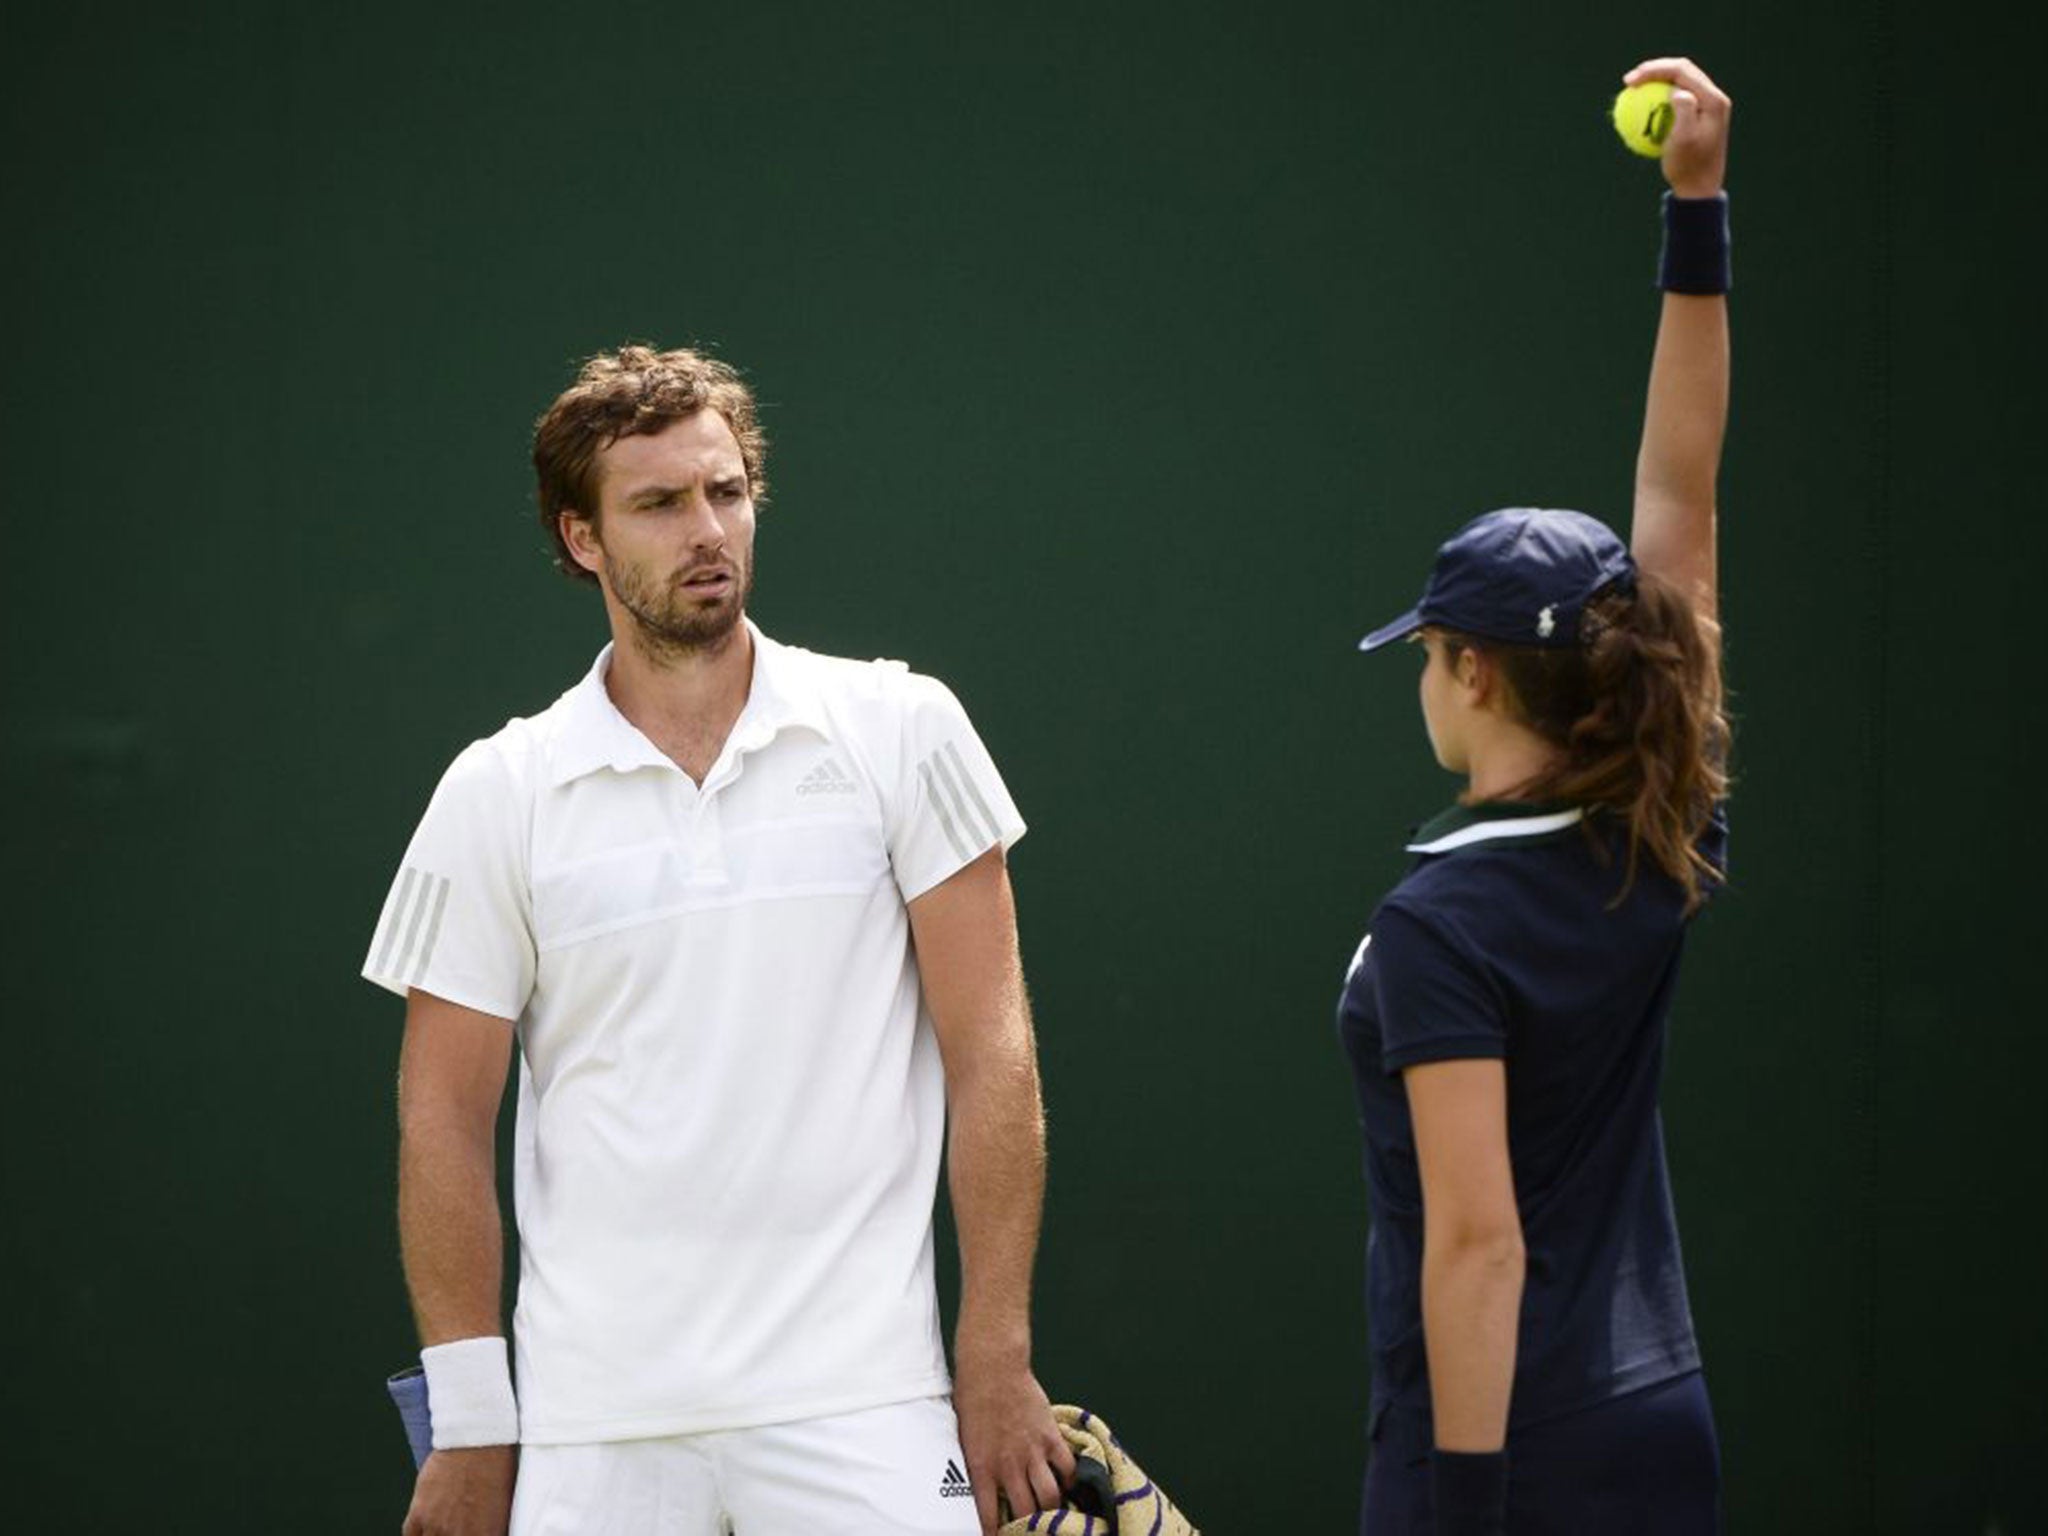 Ernests Gulbis struggles to keep his cool against Sergiy Stakhovsky